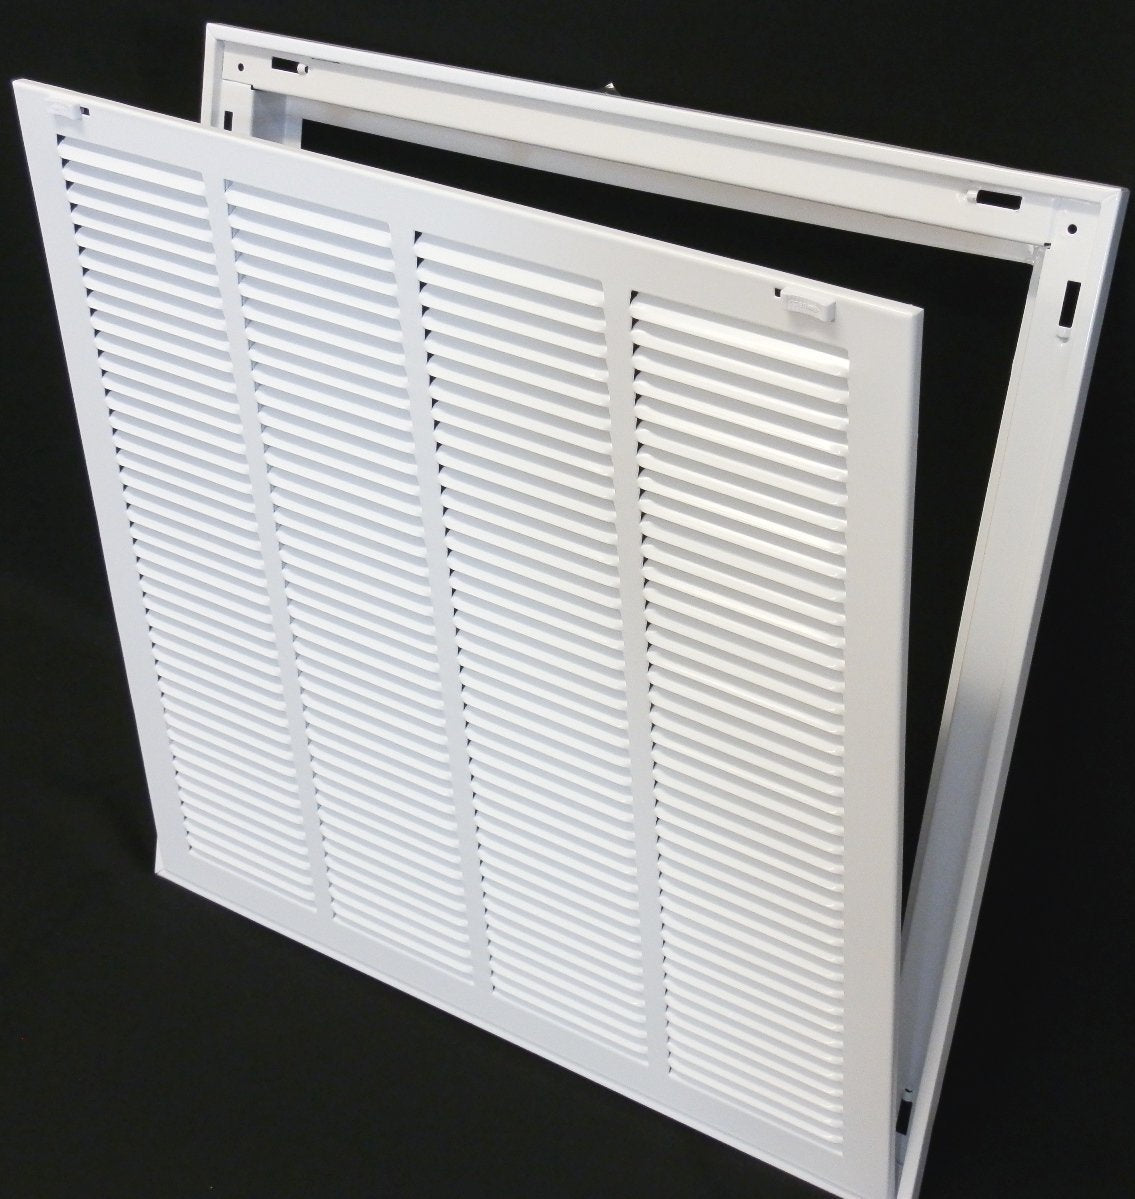 32&quot; X 28&quot; Steel Return Air Filter Grille for 1&quot; Filter - Removable Frame - [Outer Dimensions: 34 5/8&quot; X 30 5/8&quot;]